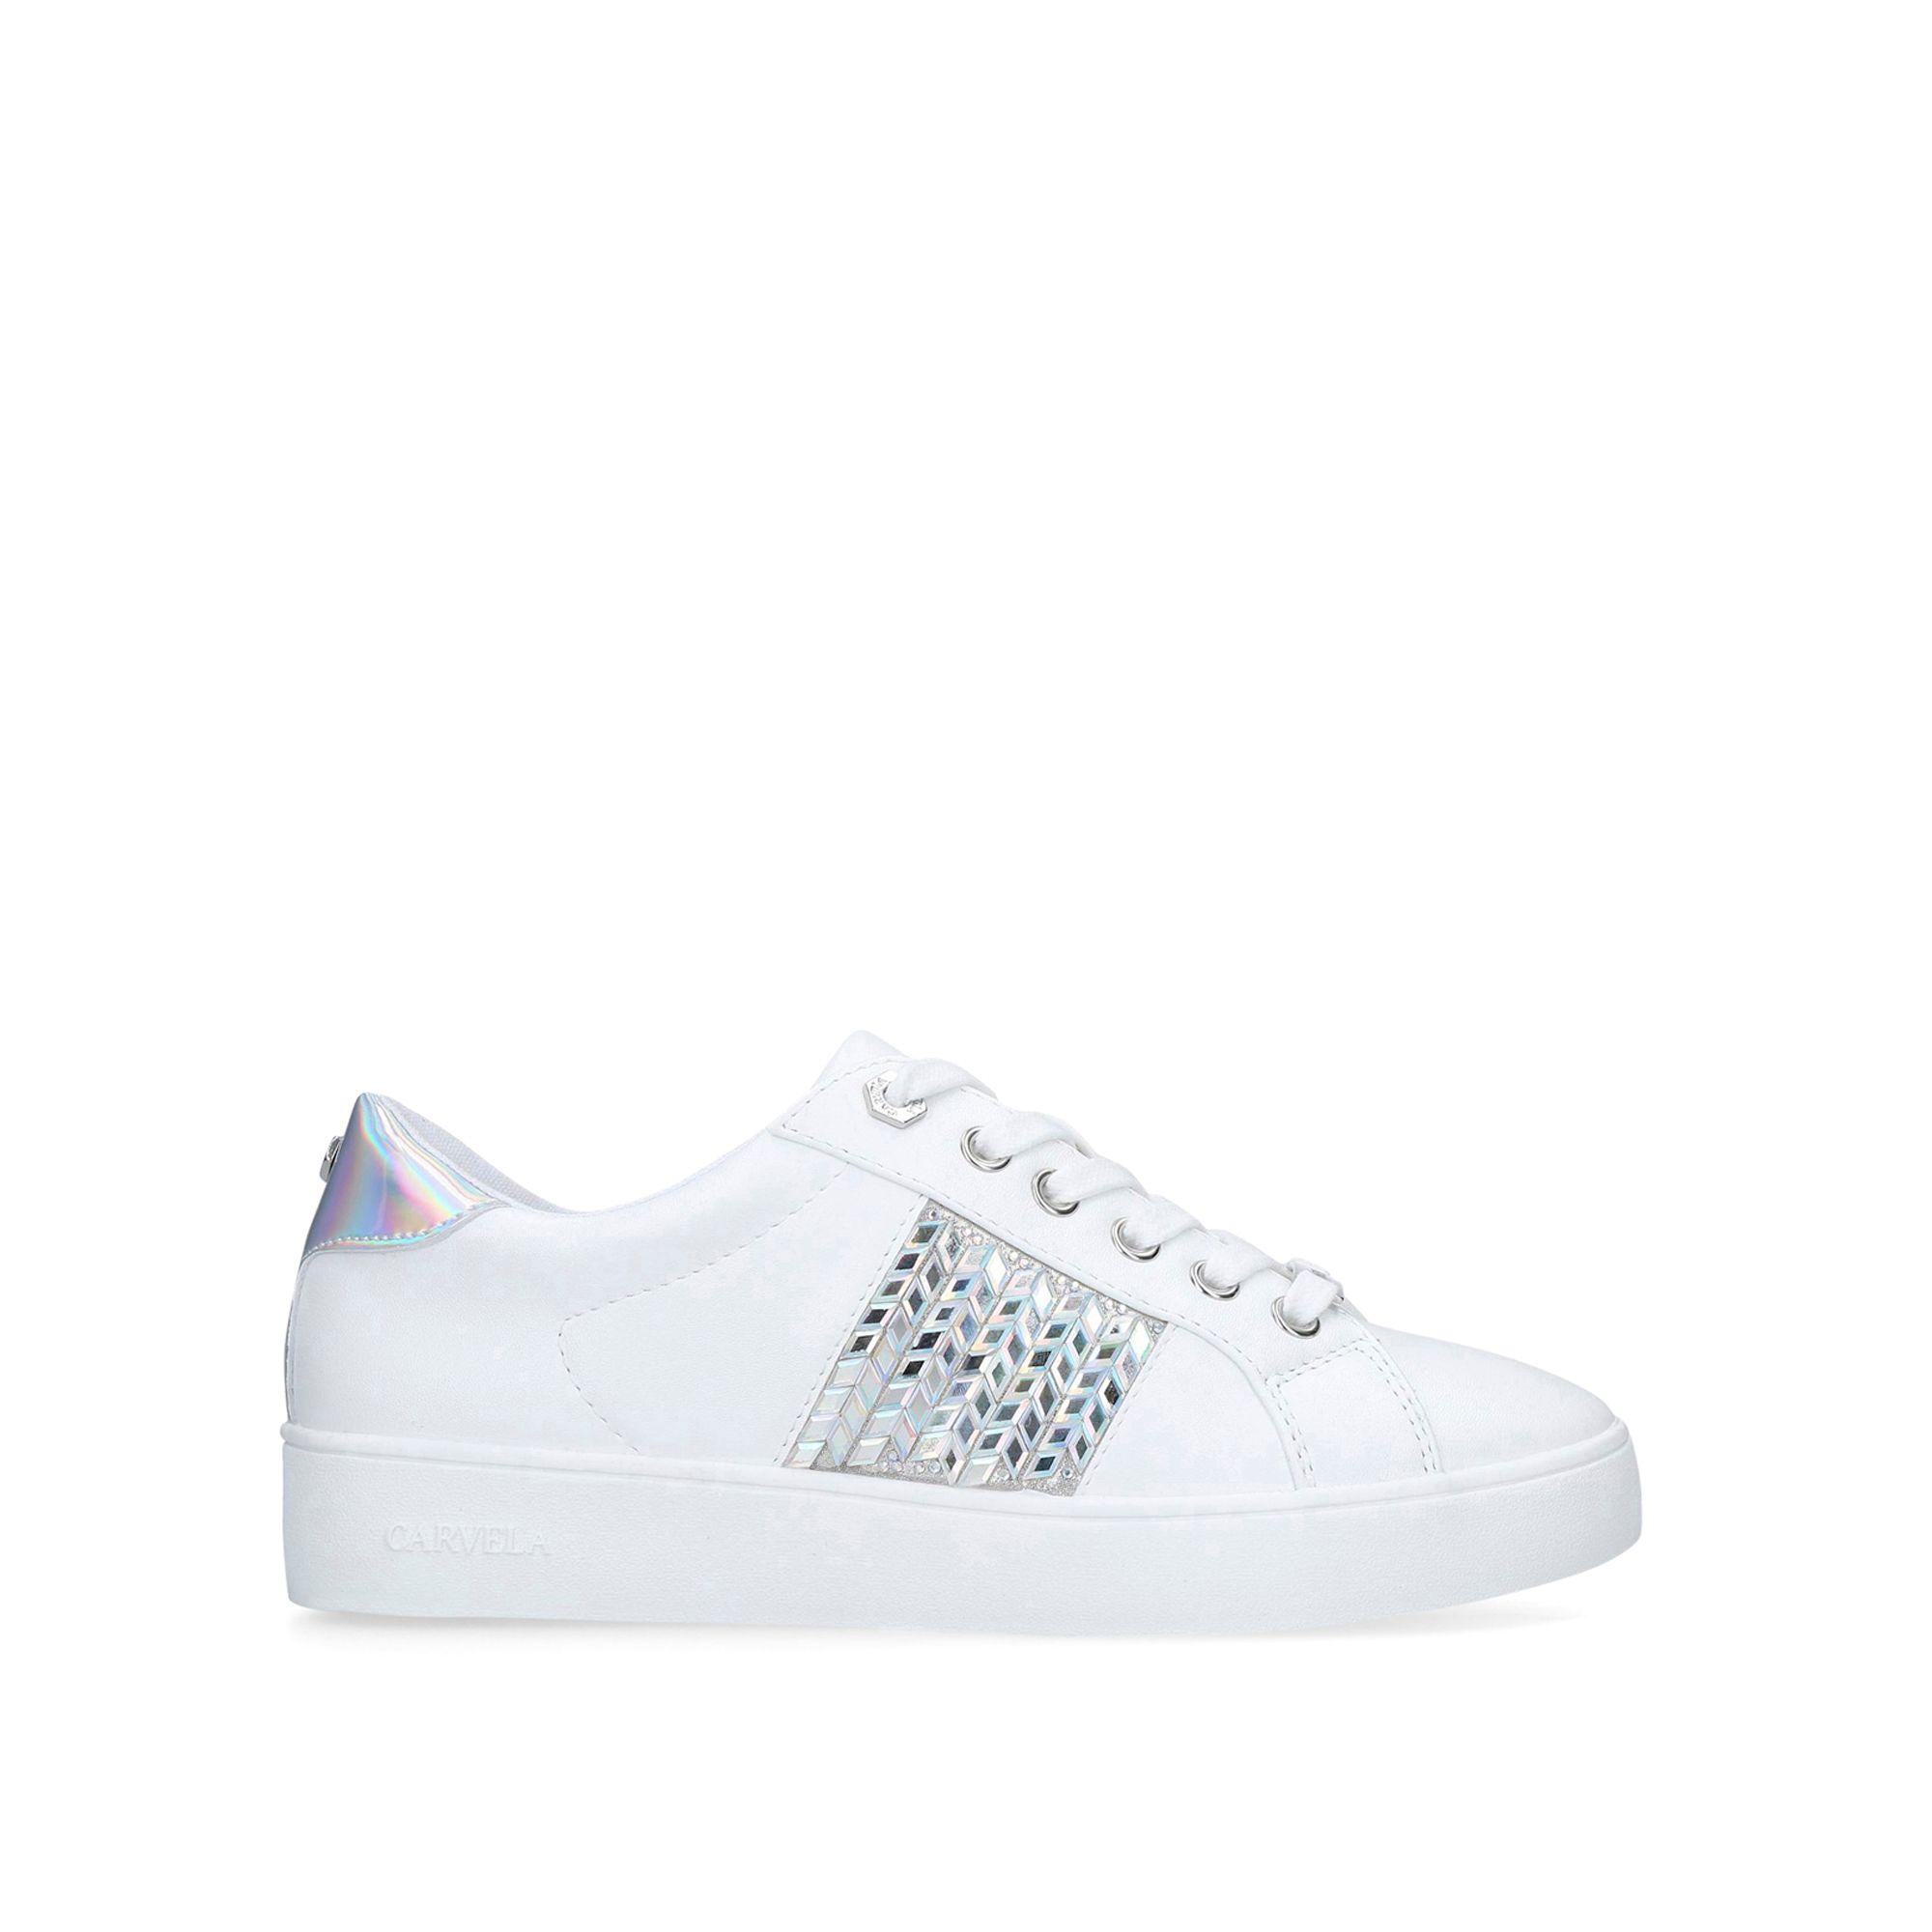 Carvela Kurt Geiger 'jazzier' Embellished Low Top Trainers in White ...